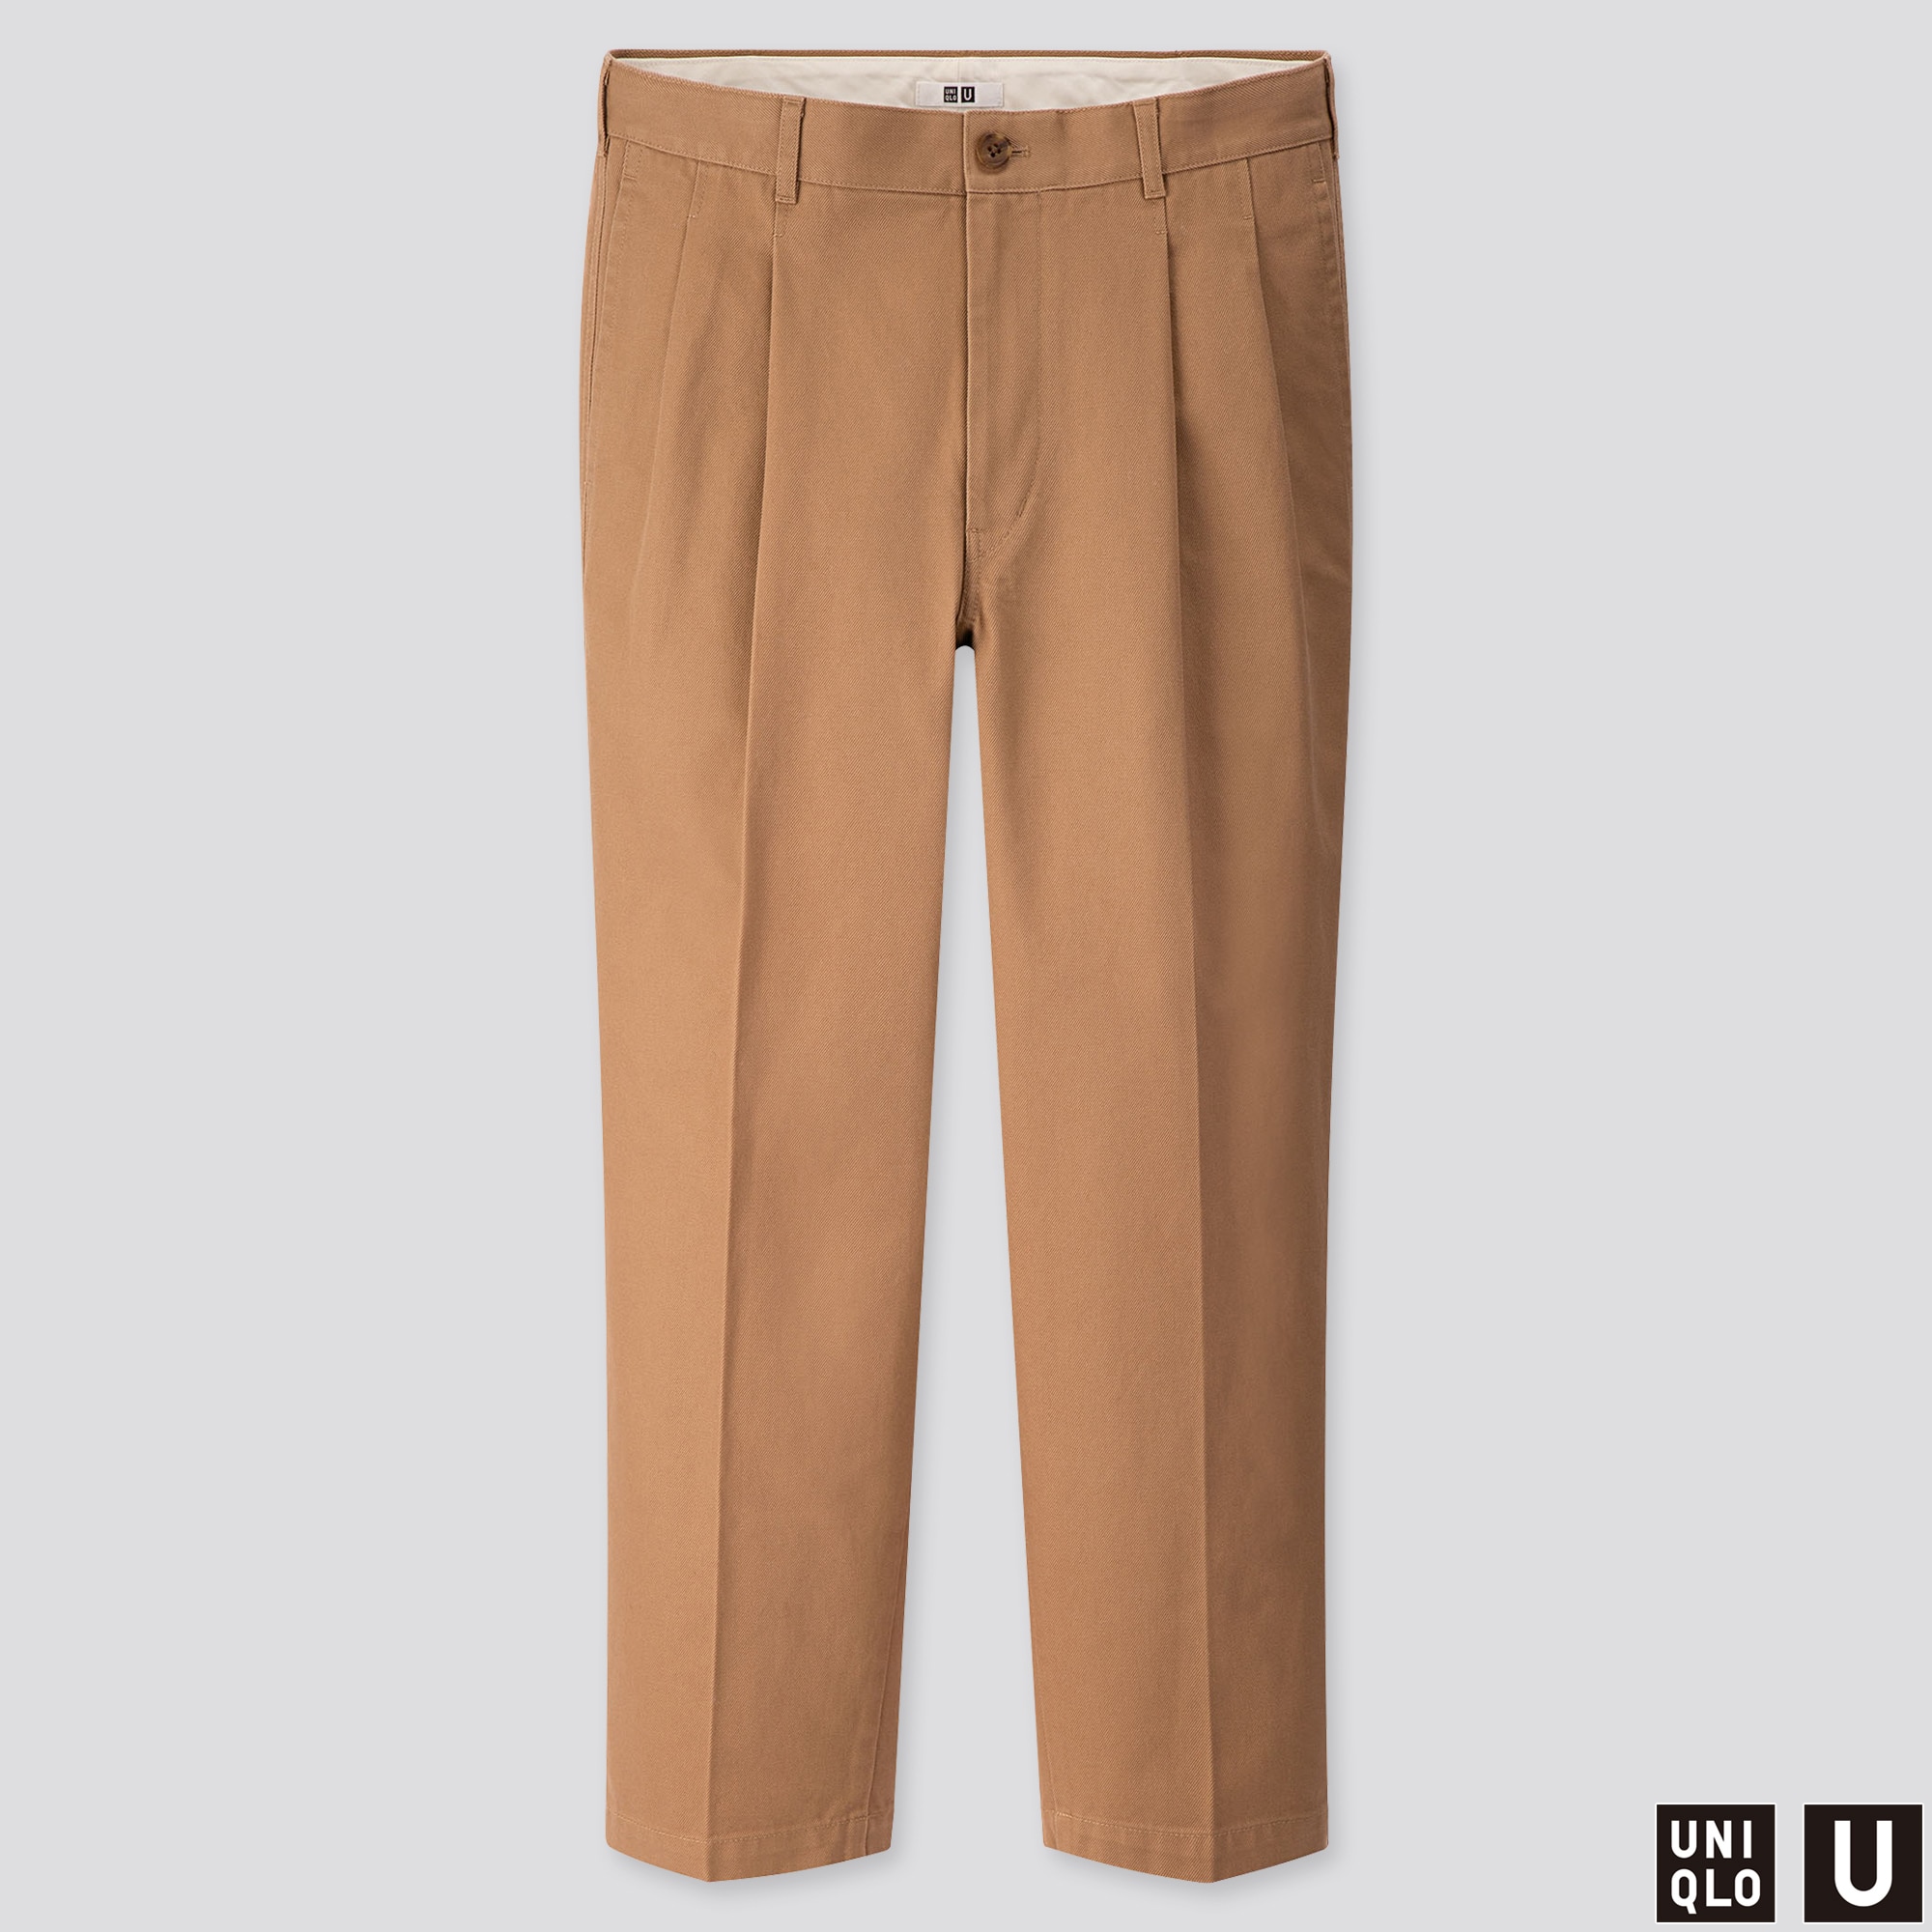 BDG Logan Pleated Chino Pant  Urban Outfitters